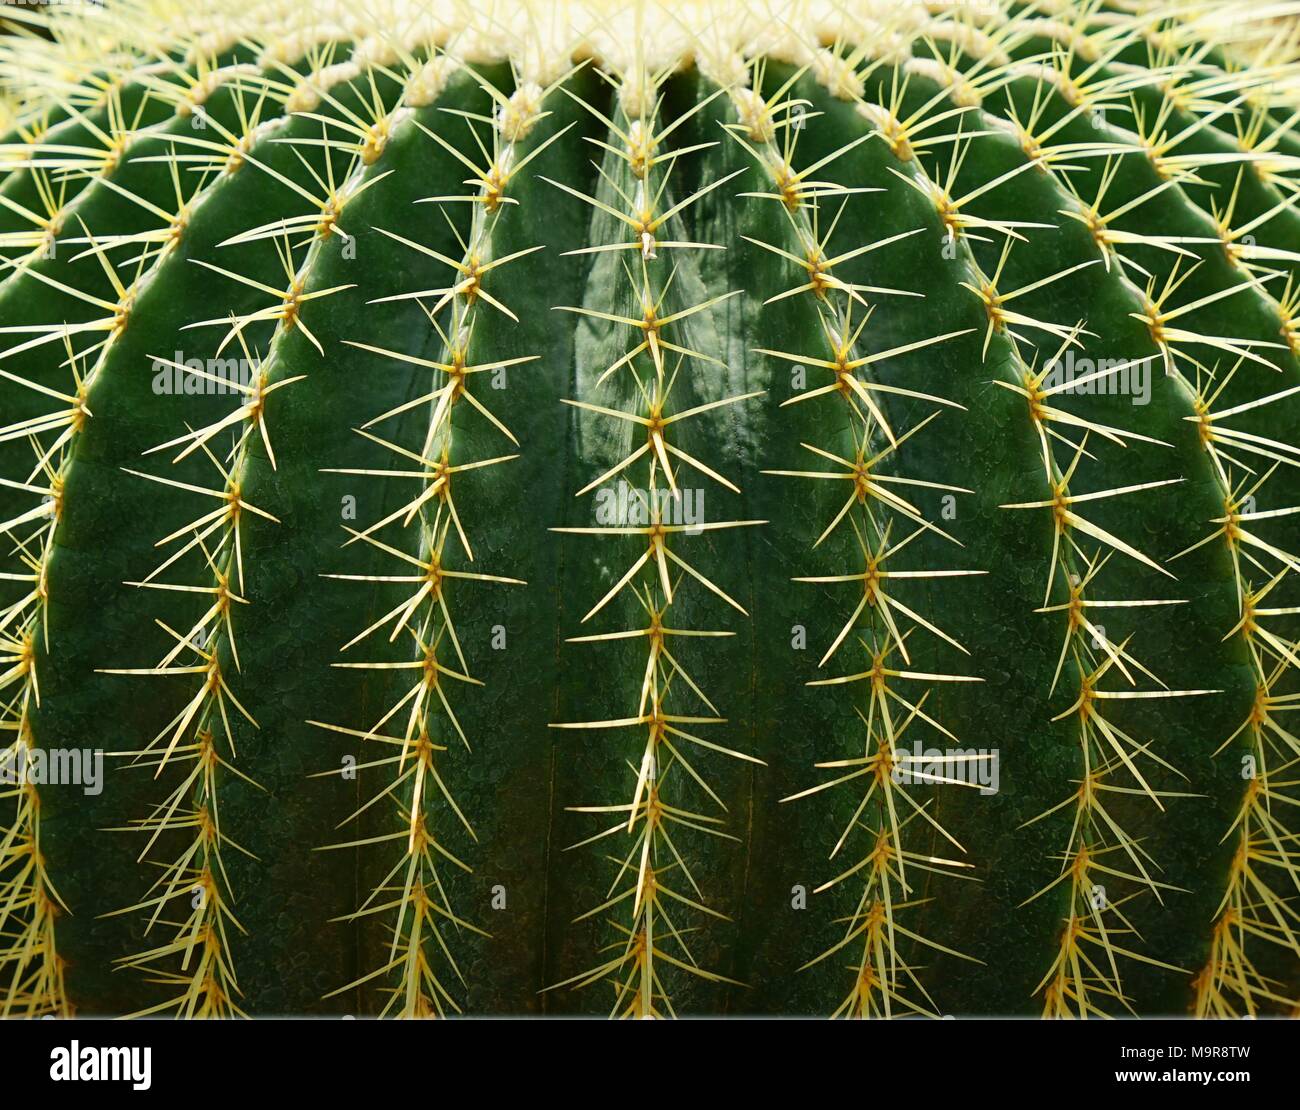 Group of golden ball cactus or Echinopsis cactus plants Stock Photo